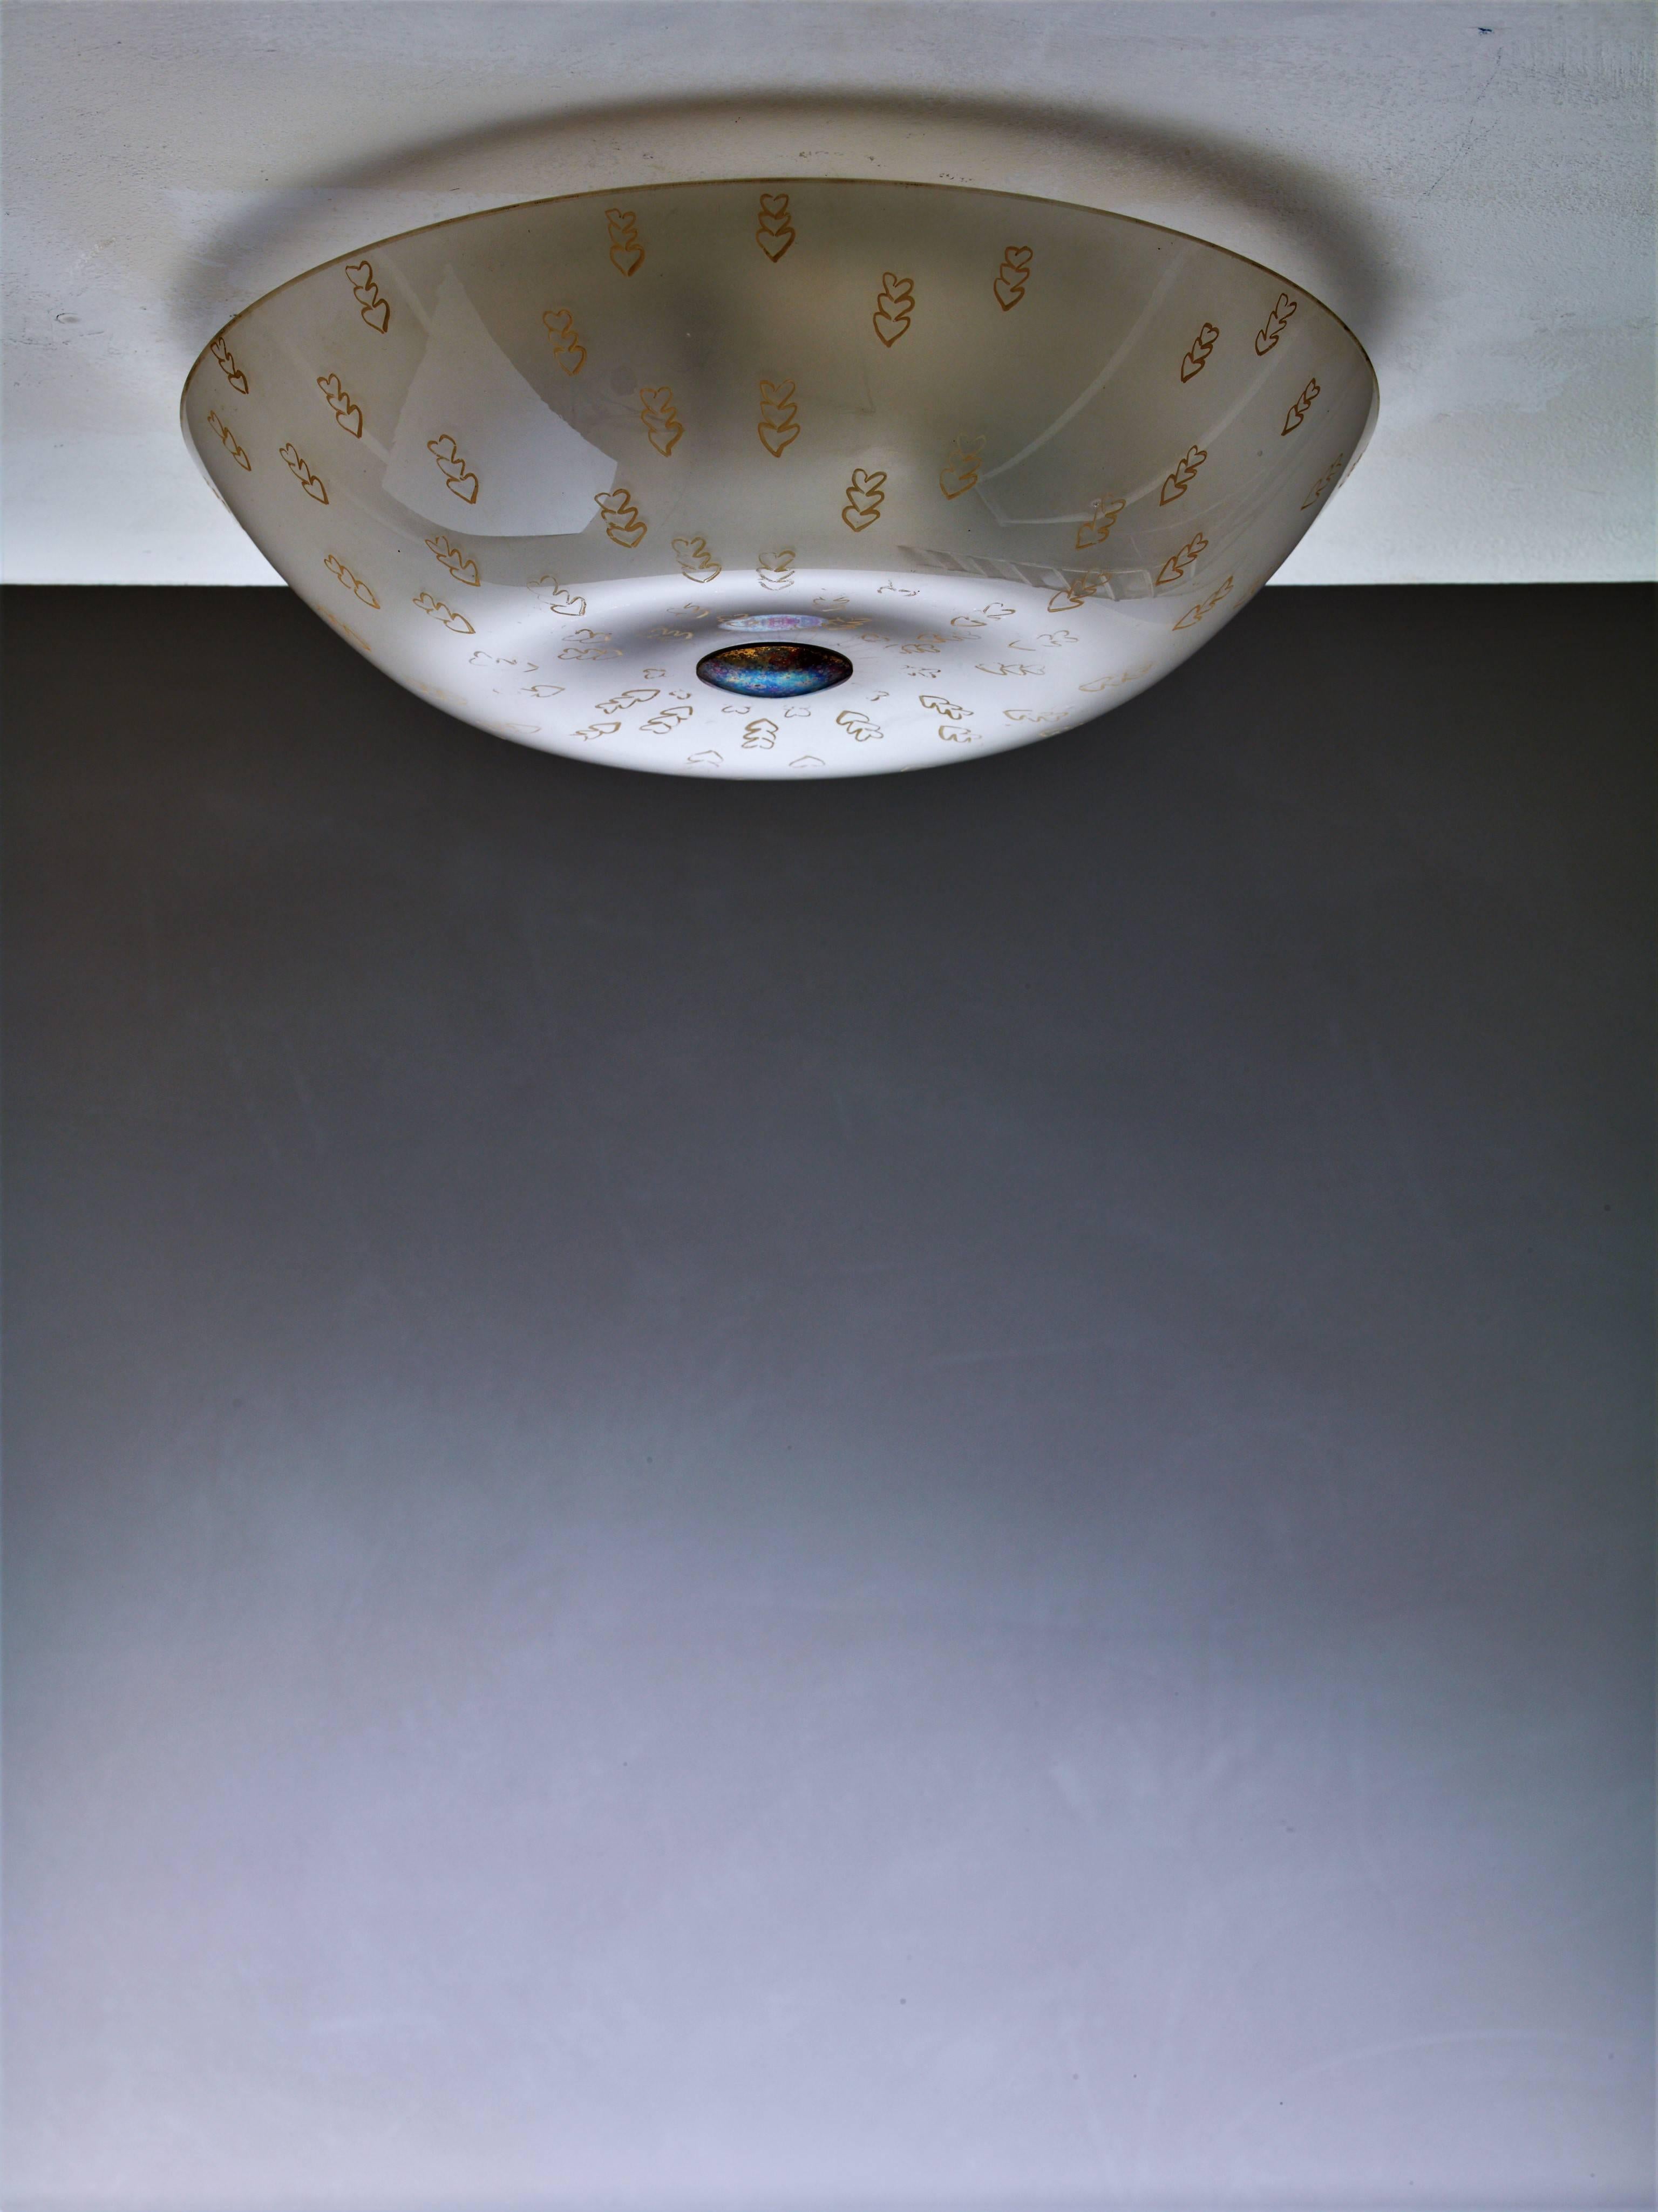 A model '1001' flush mount by Lisa Johansson-Pape for Orno. The curved diffuser is made of frosted glass with painted decorations.
The lamp has three light bulbs and is marked by Orno. A beautiful neoclassical flush mount.